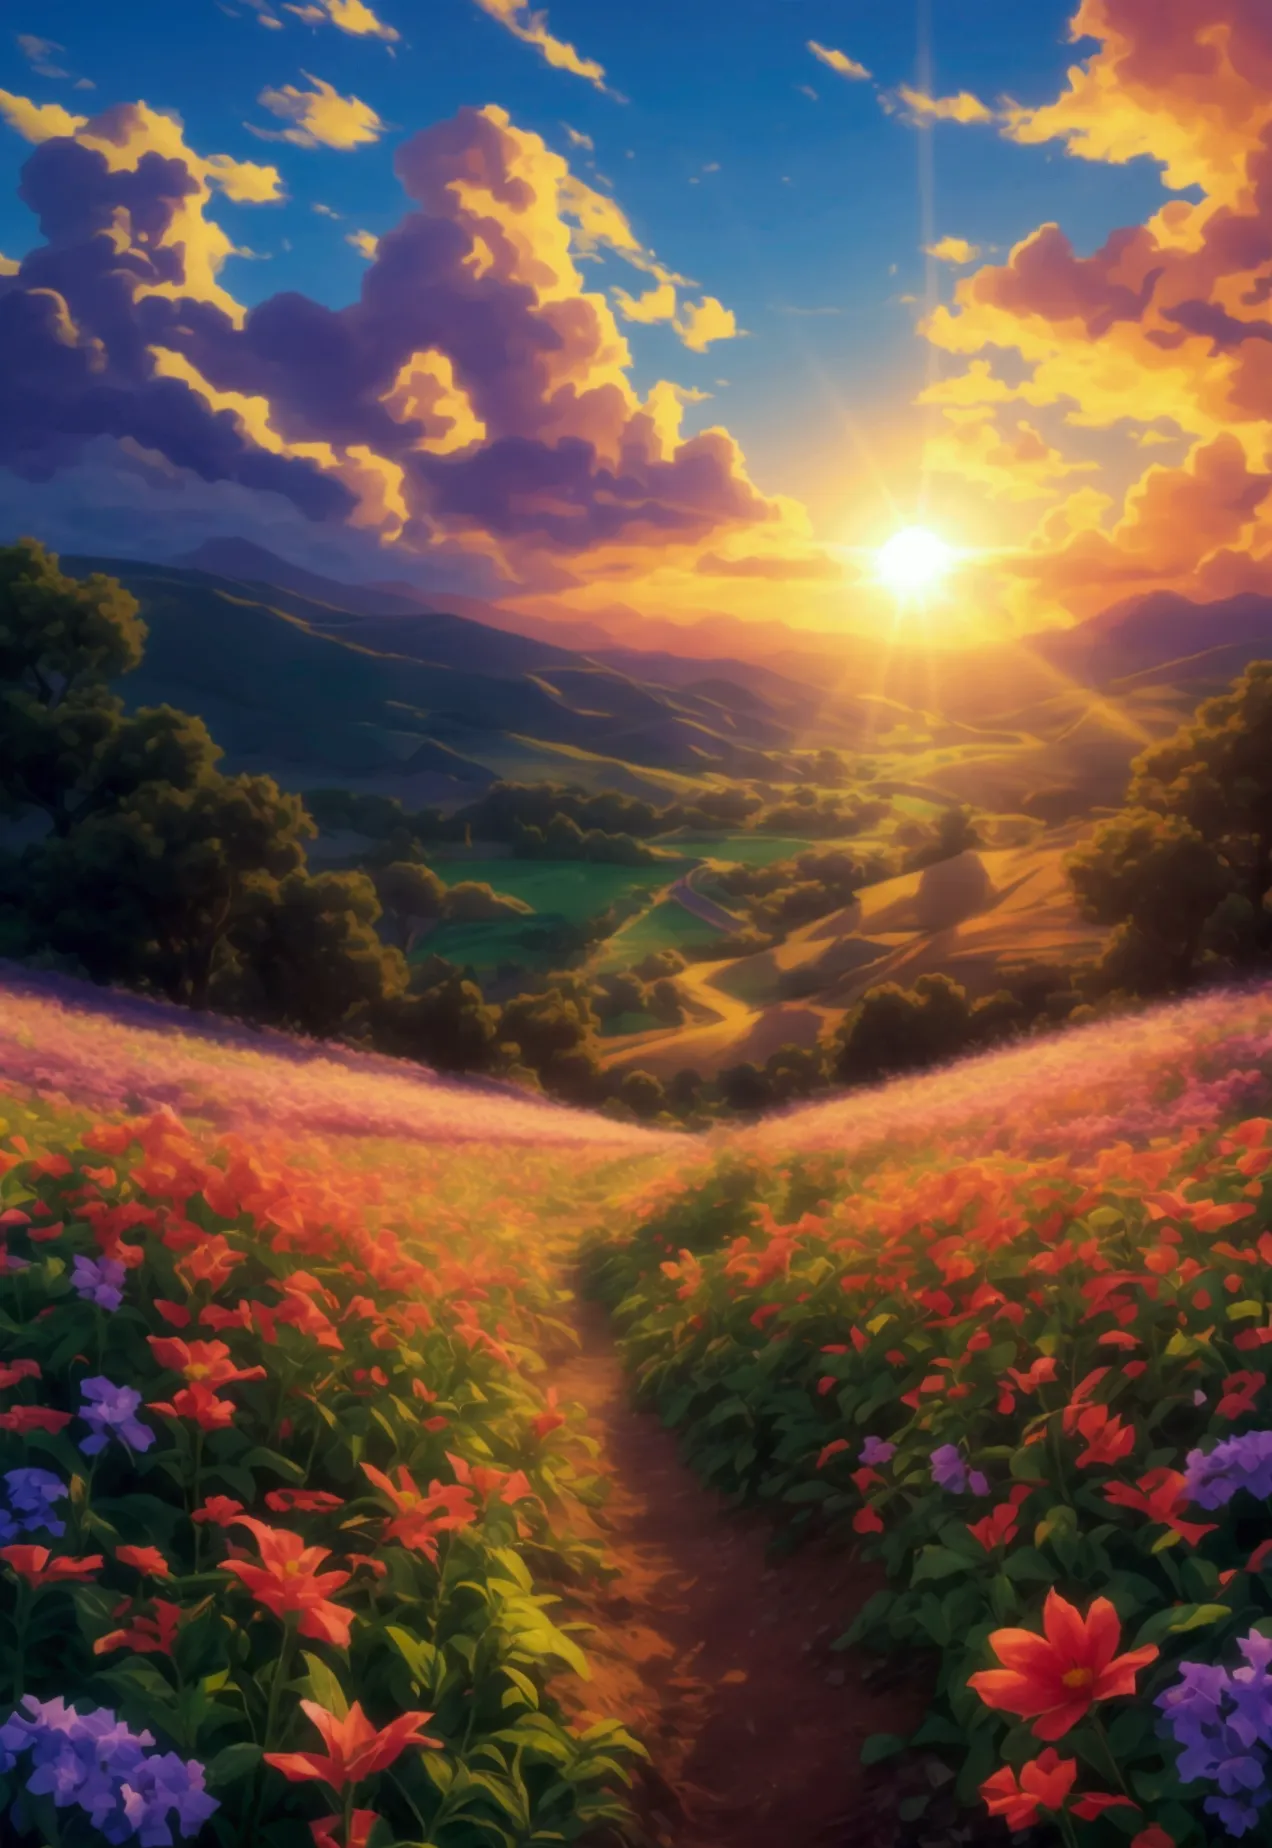 Create a realistic landscape with a shining sun and beautiful flower fields。